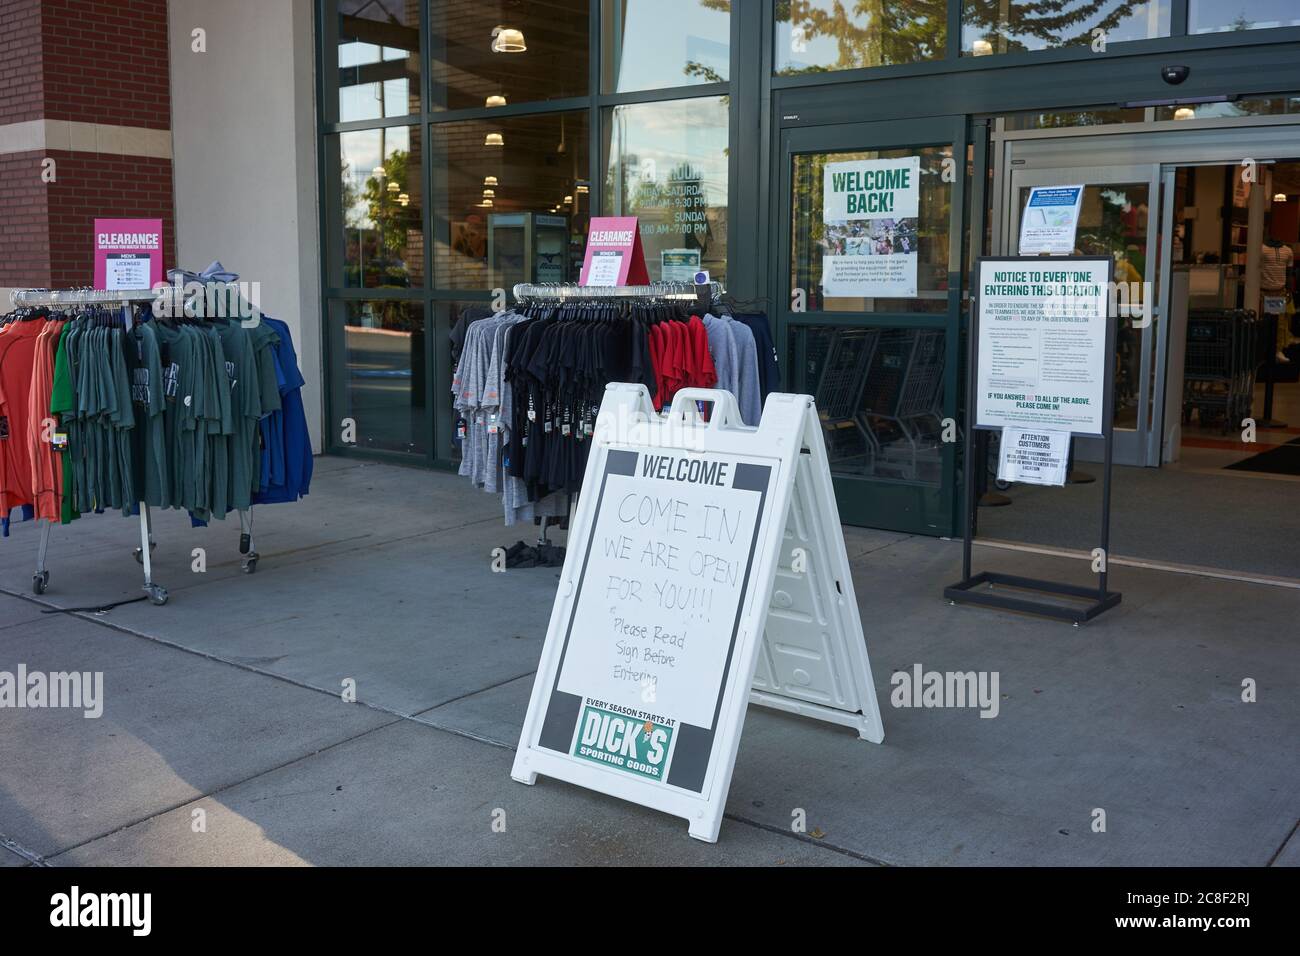 Signs clarifying safety protocols are seen at the entrance to a reopened Dick's Sporting Goods store in Lake Oswego, Oregon, on Thurs., July 22, 2020. Stock Photo